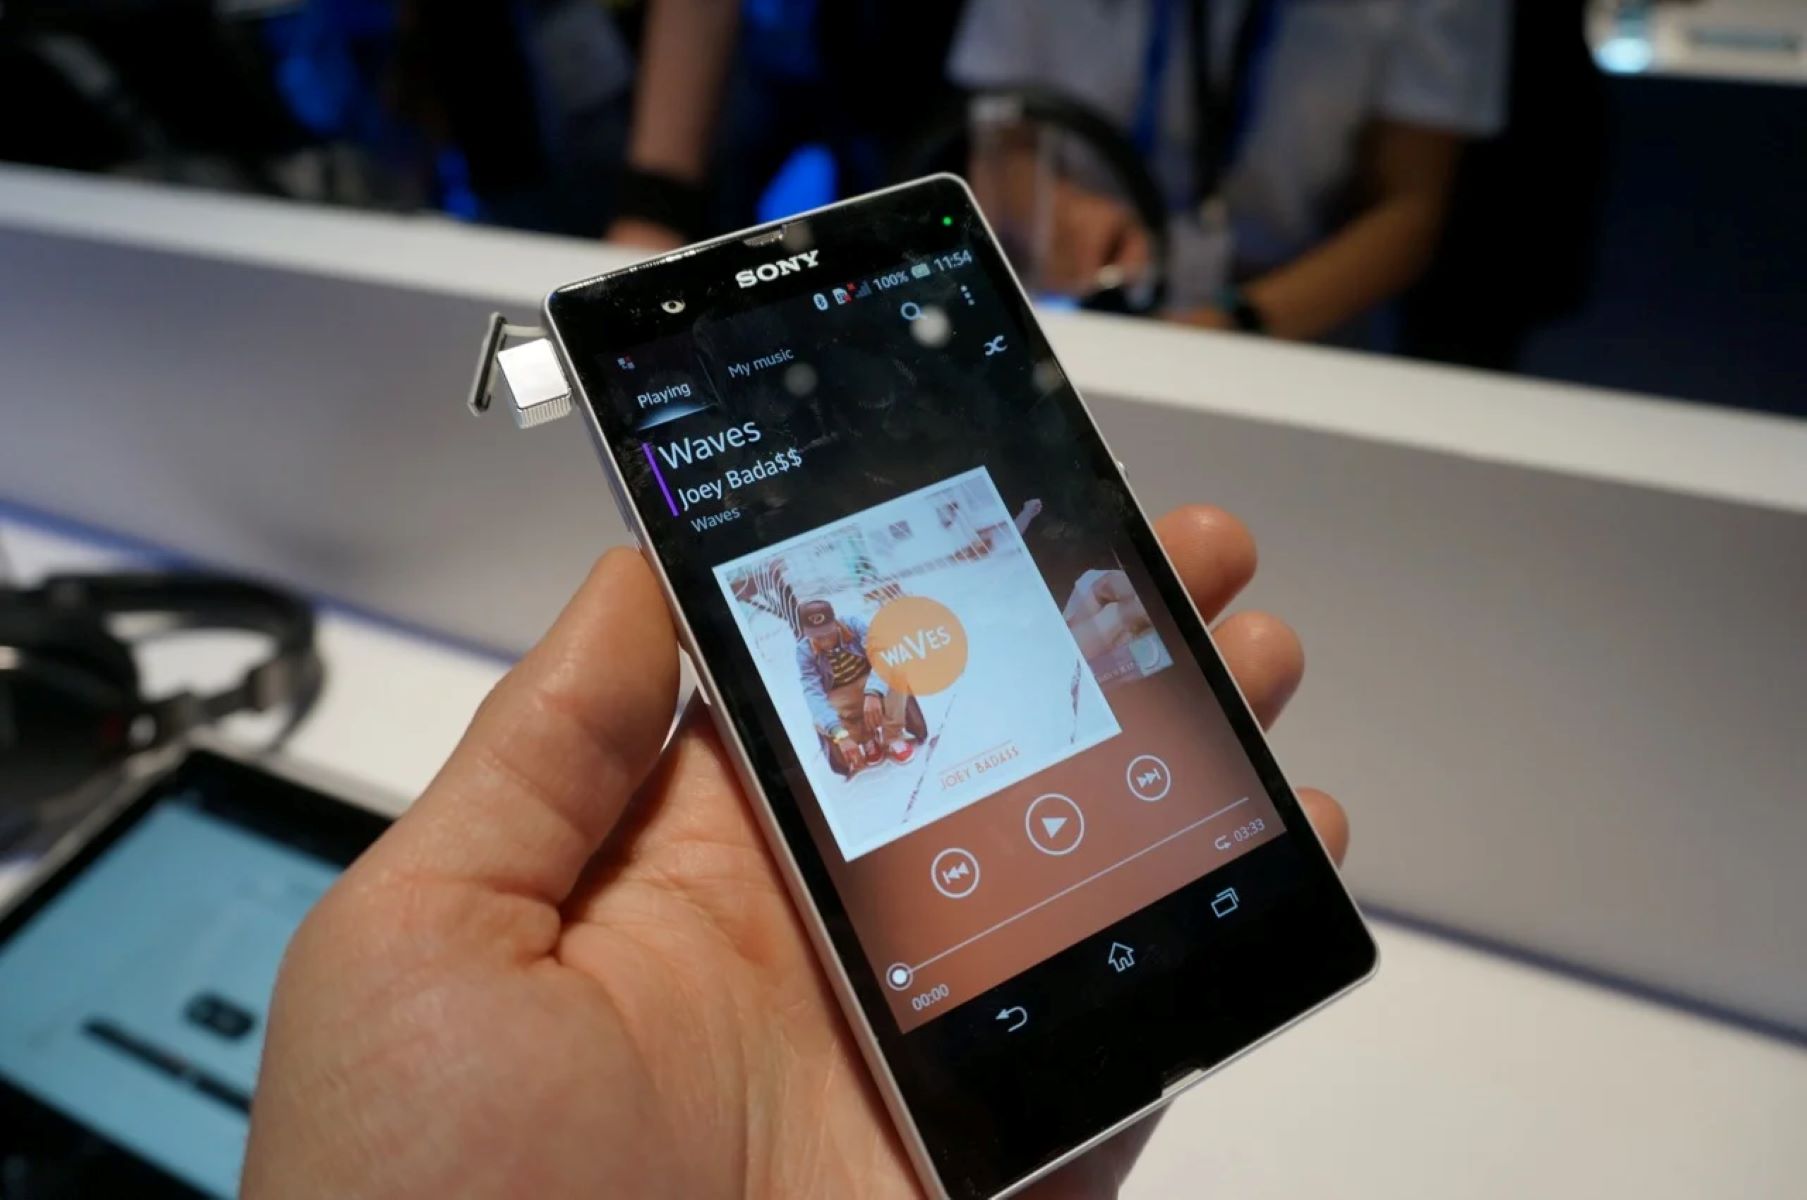 Music Download On Xperia Z: A Step-by-Step Guide